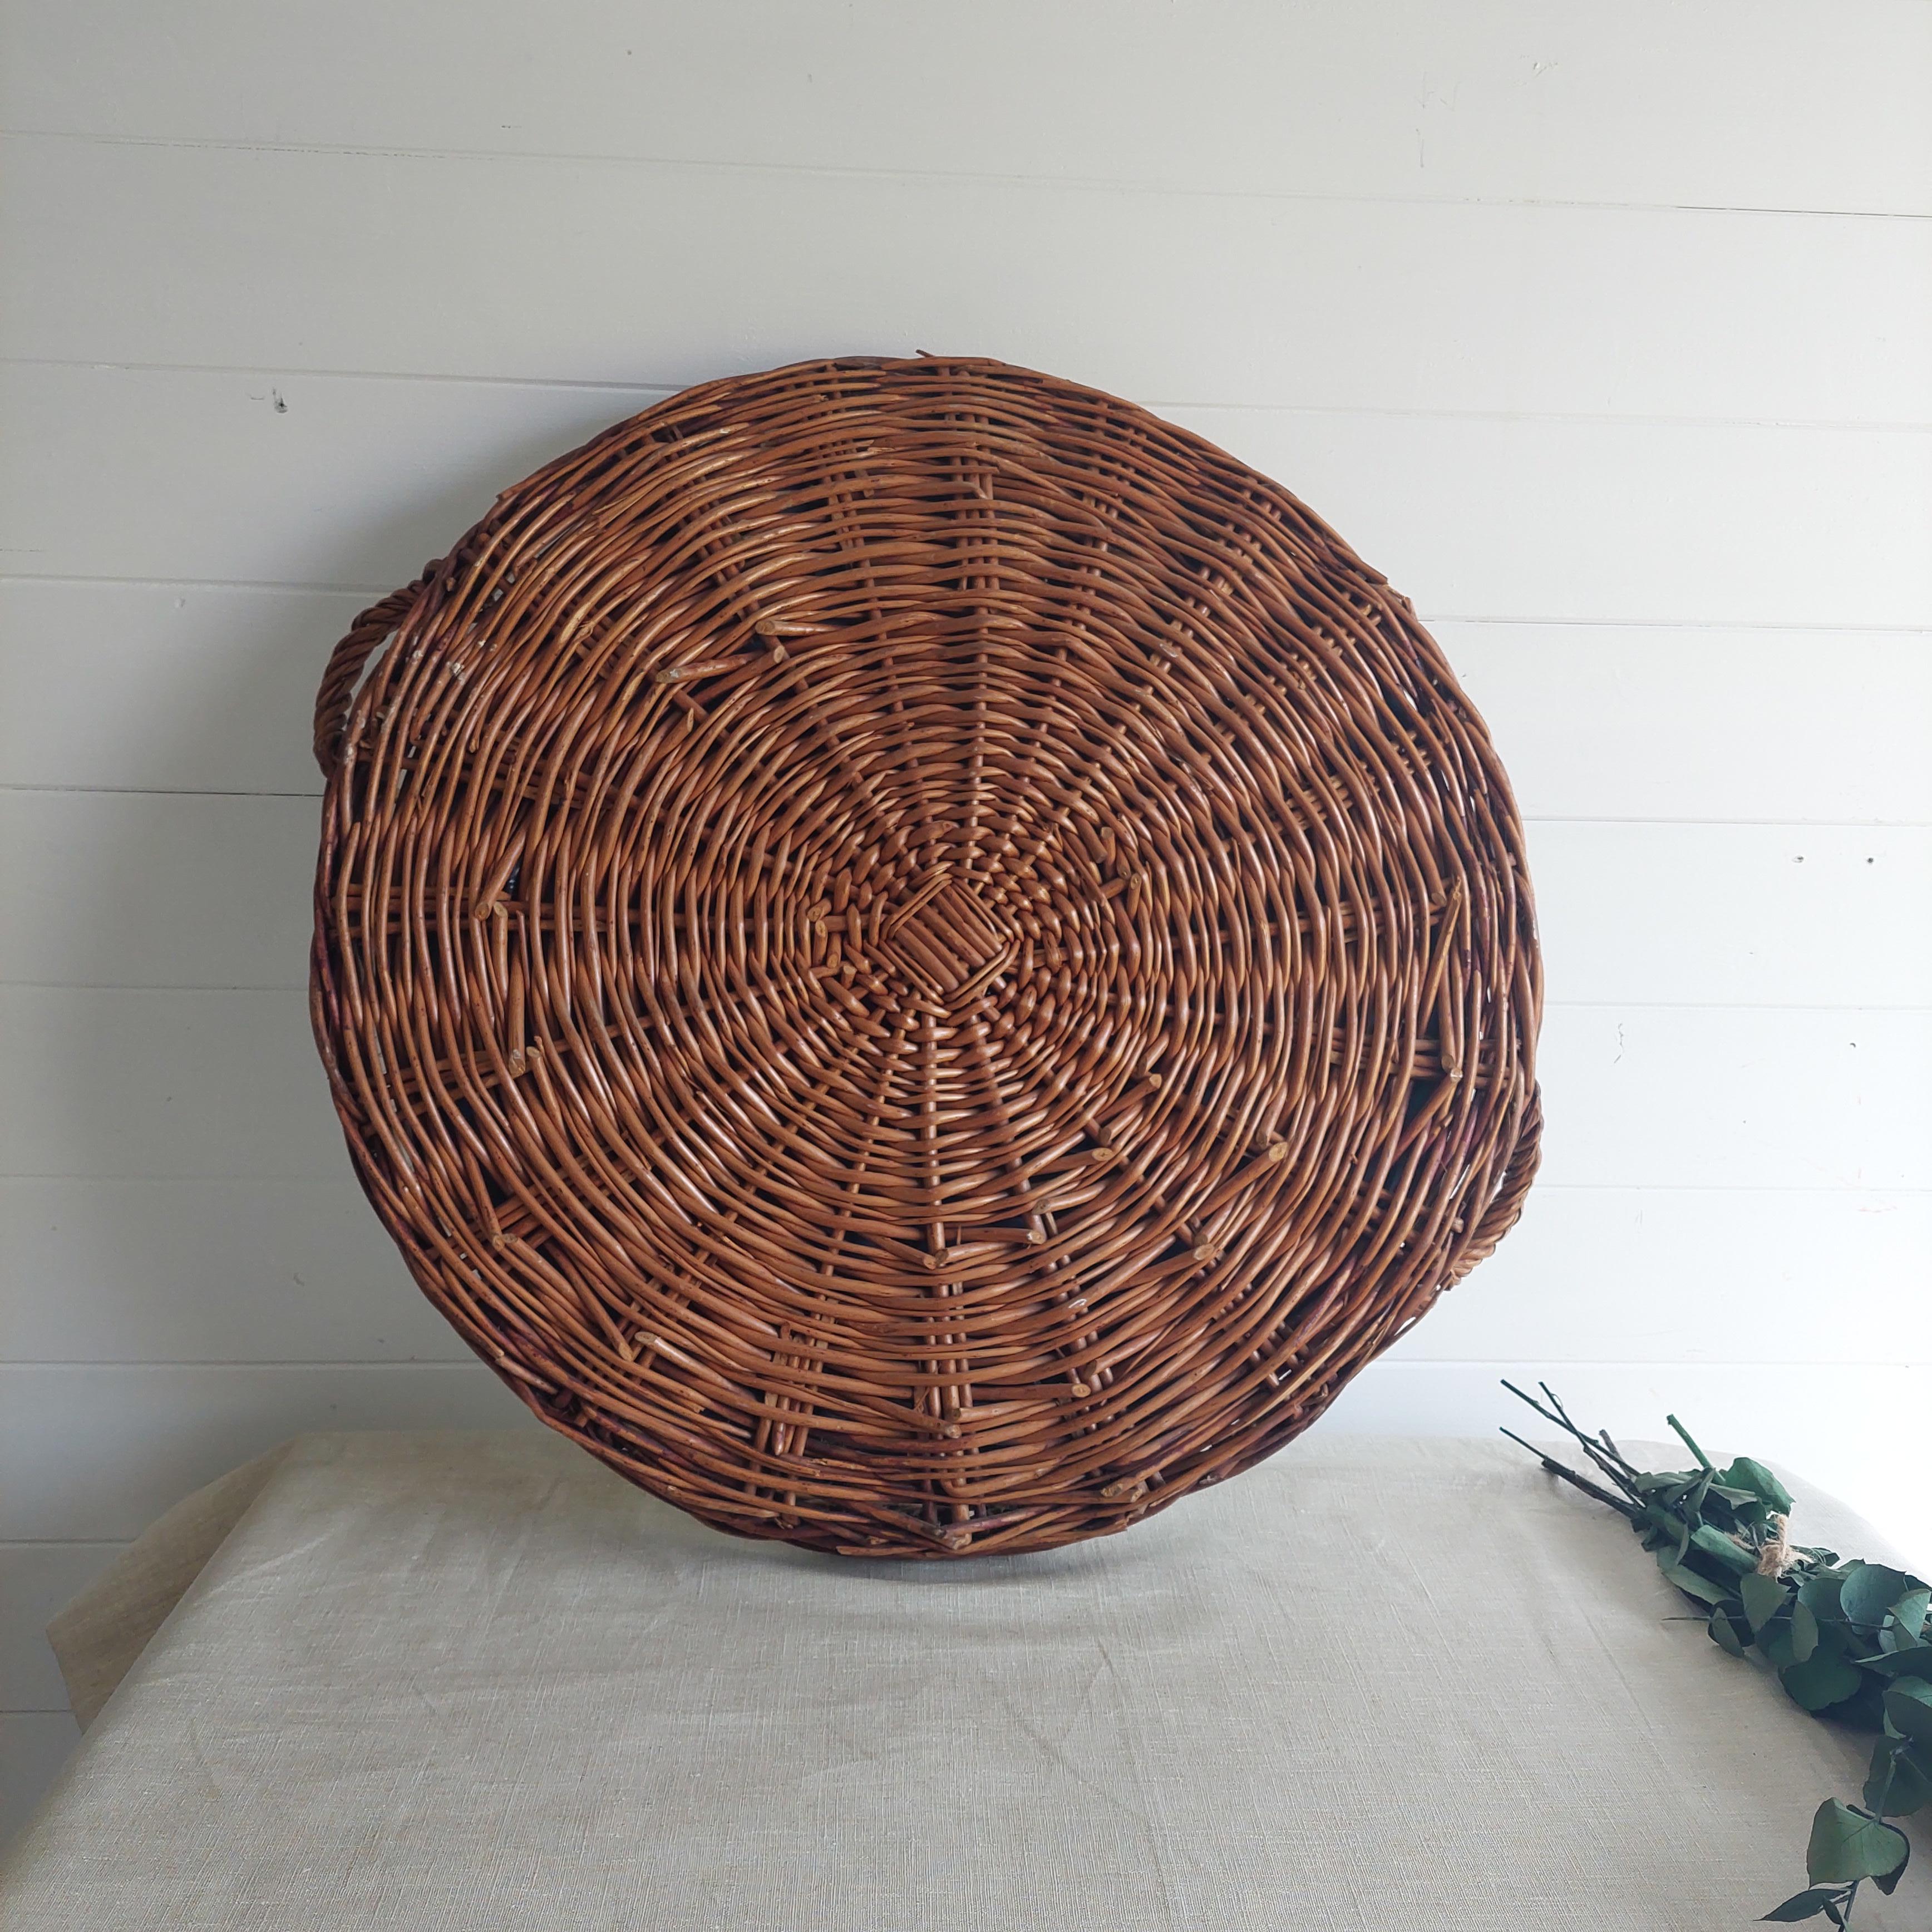 20th Century  Large Round Wicker Display Mirrored Tray With Handles 64cm diam 60s For Sale